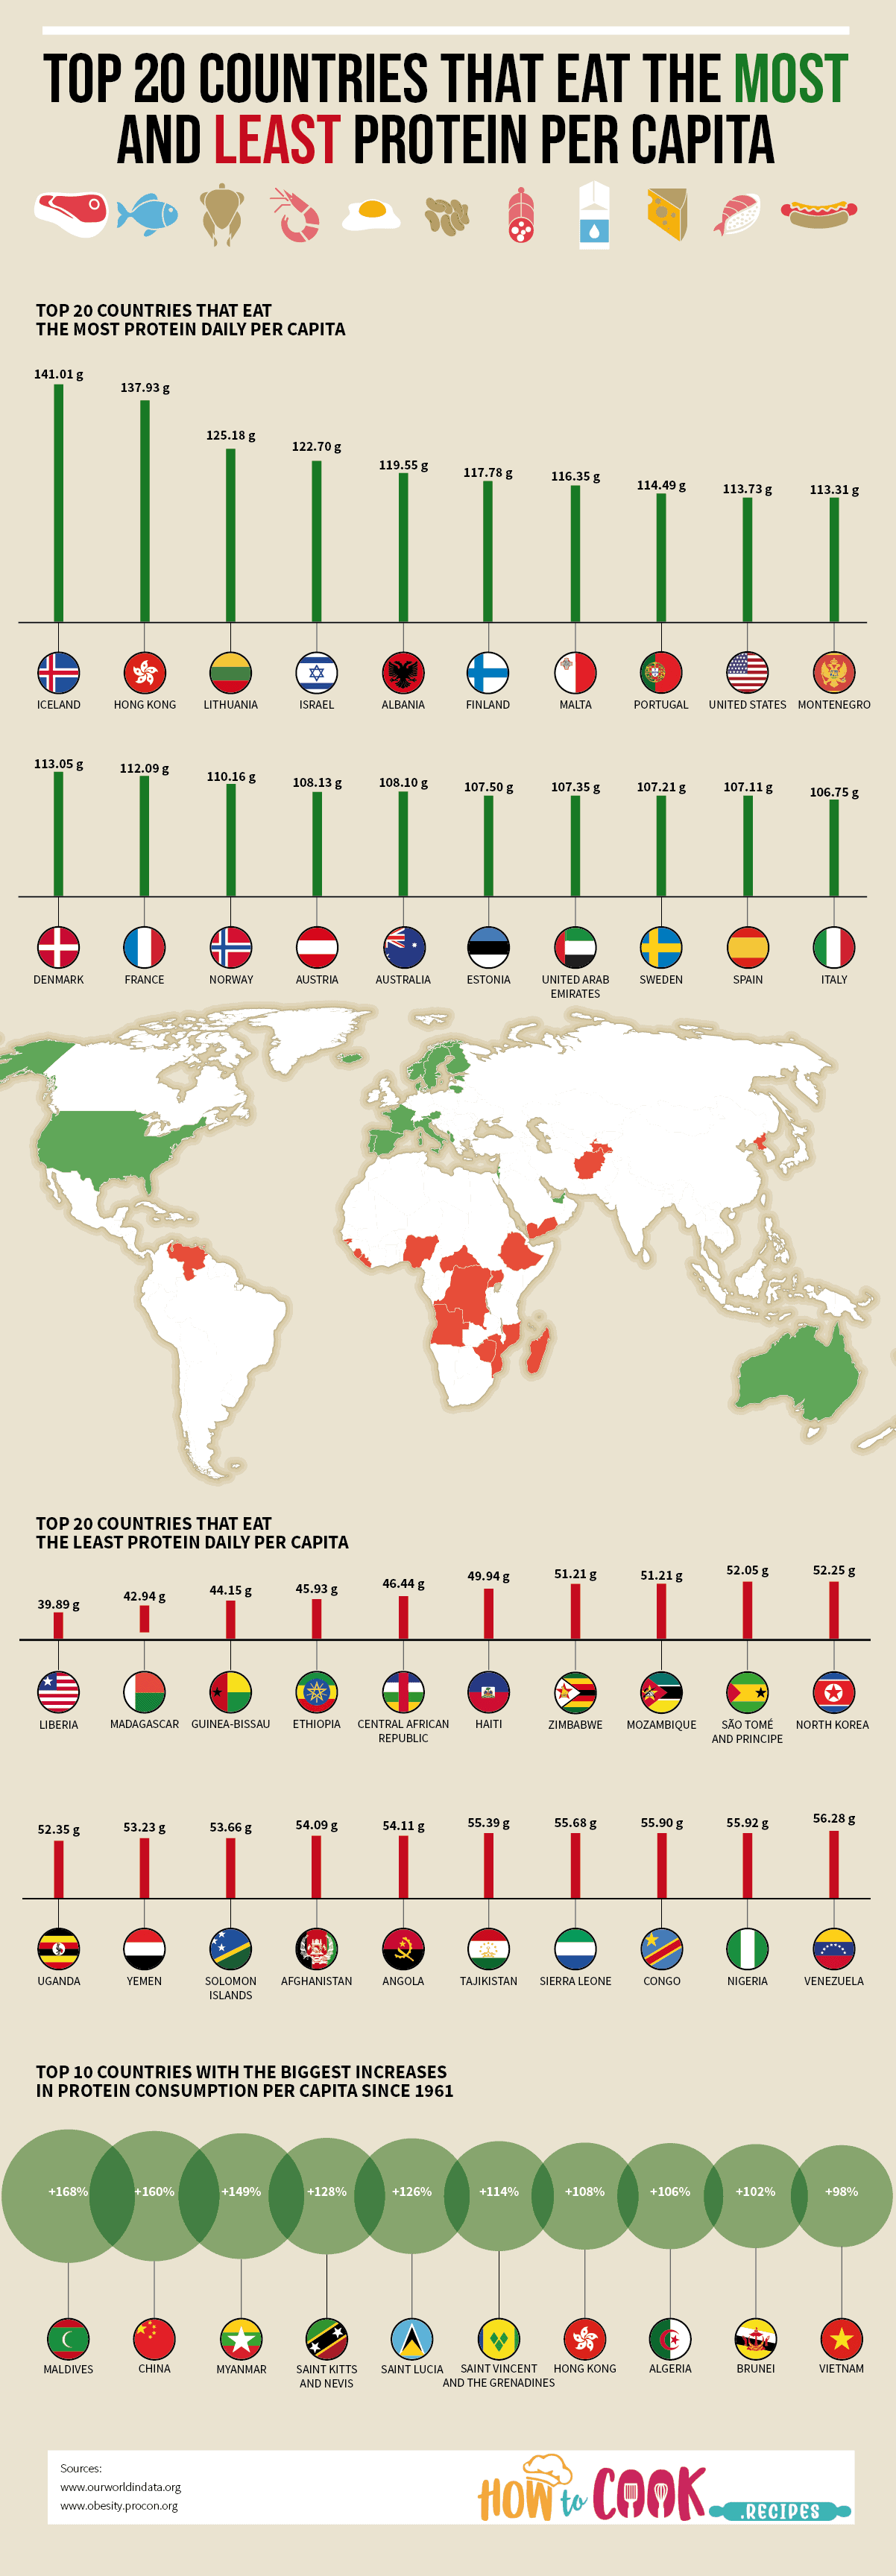 ranking countries based on their protein intake